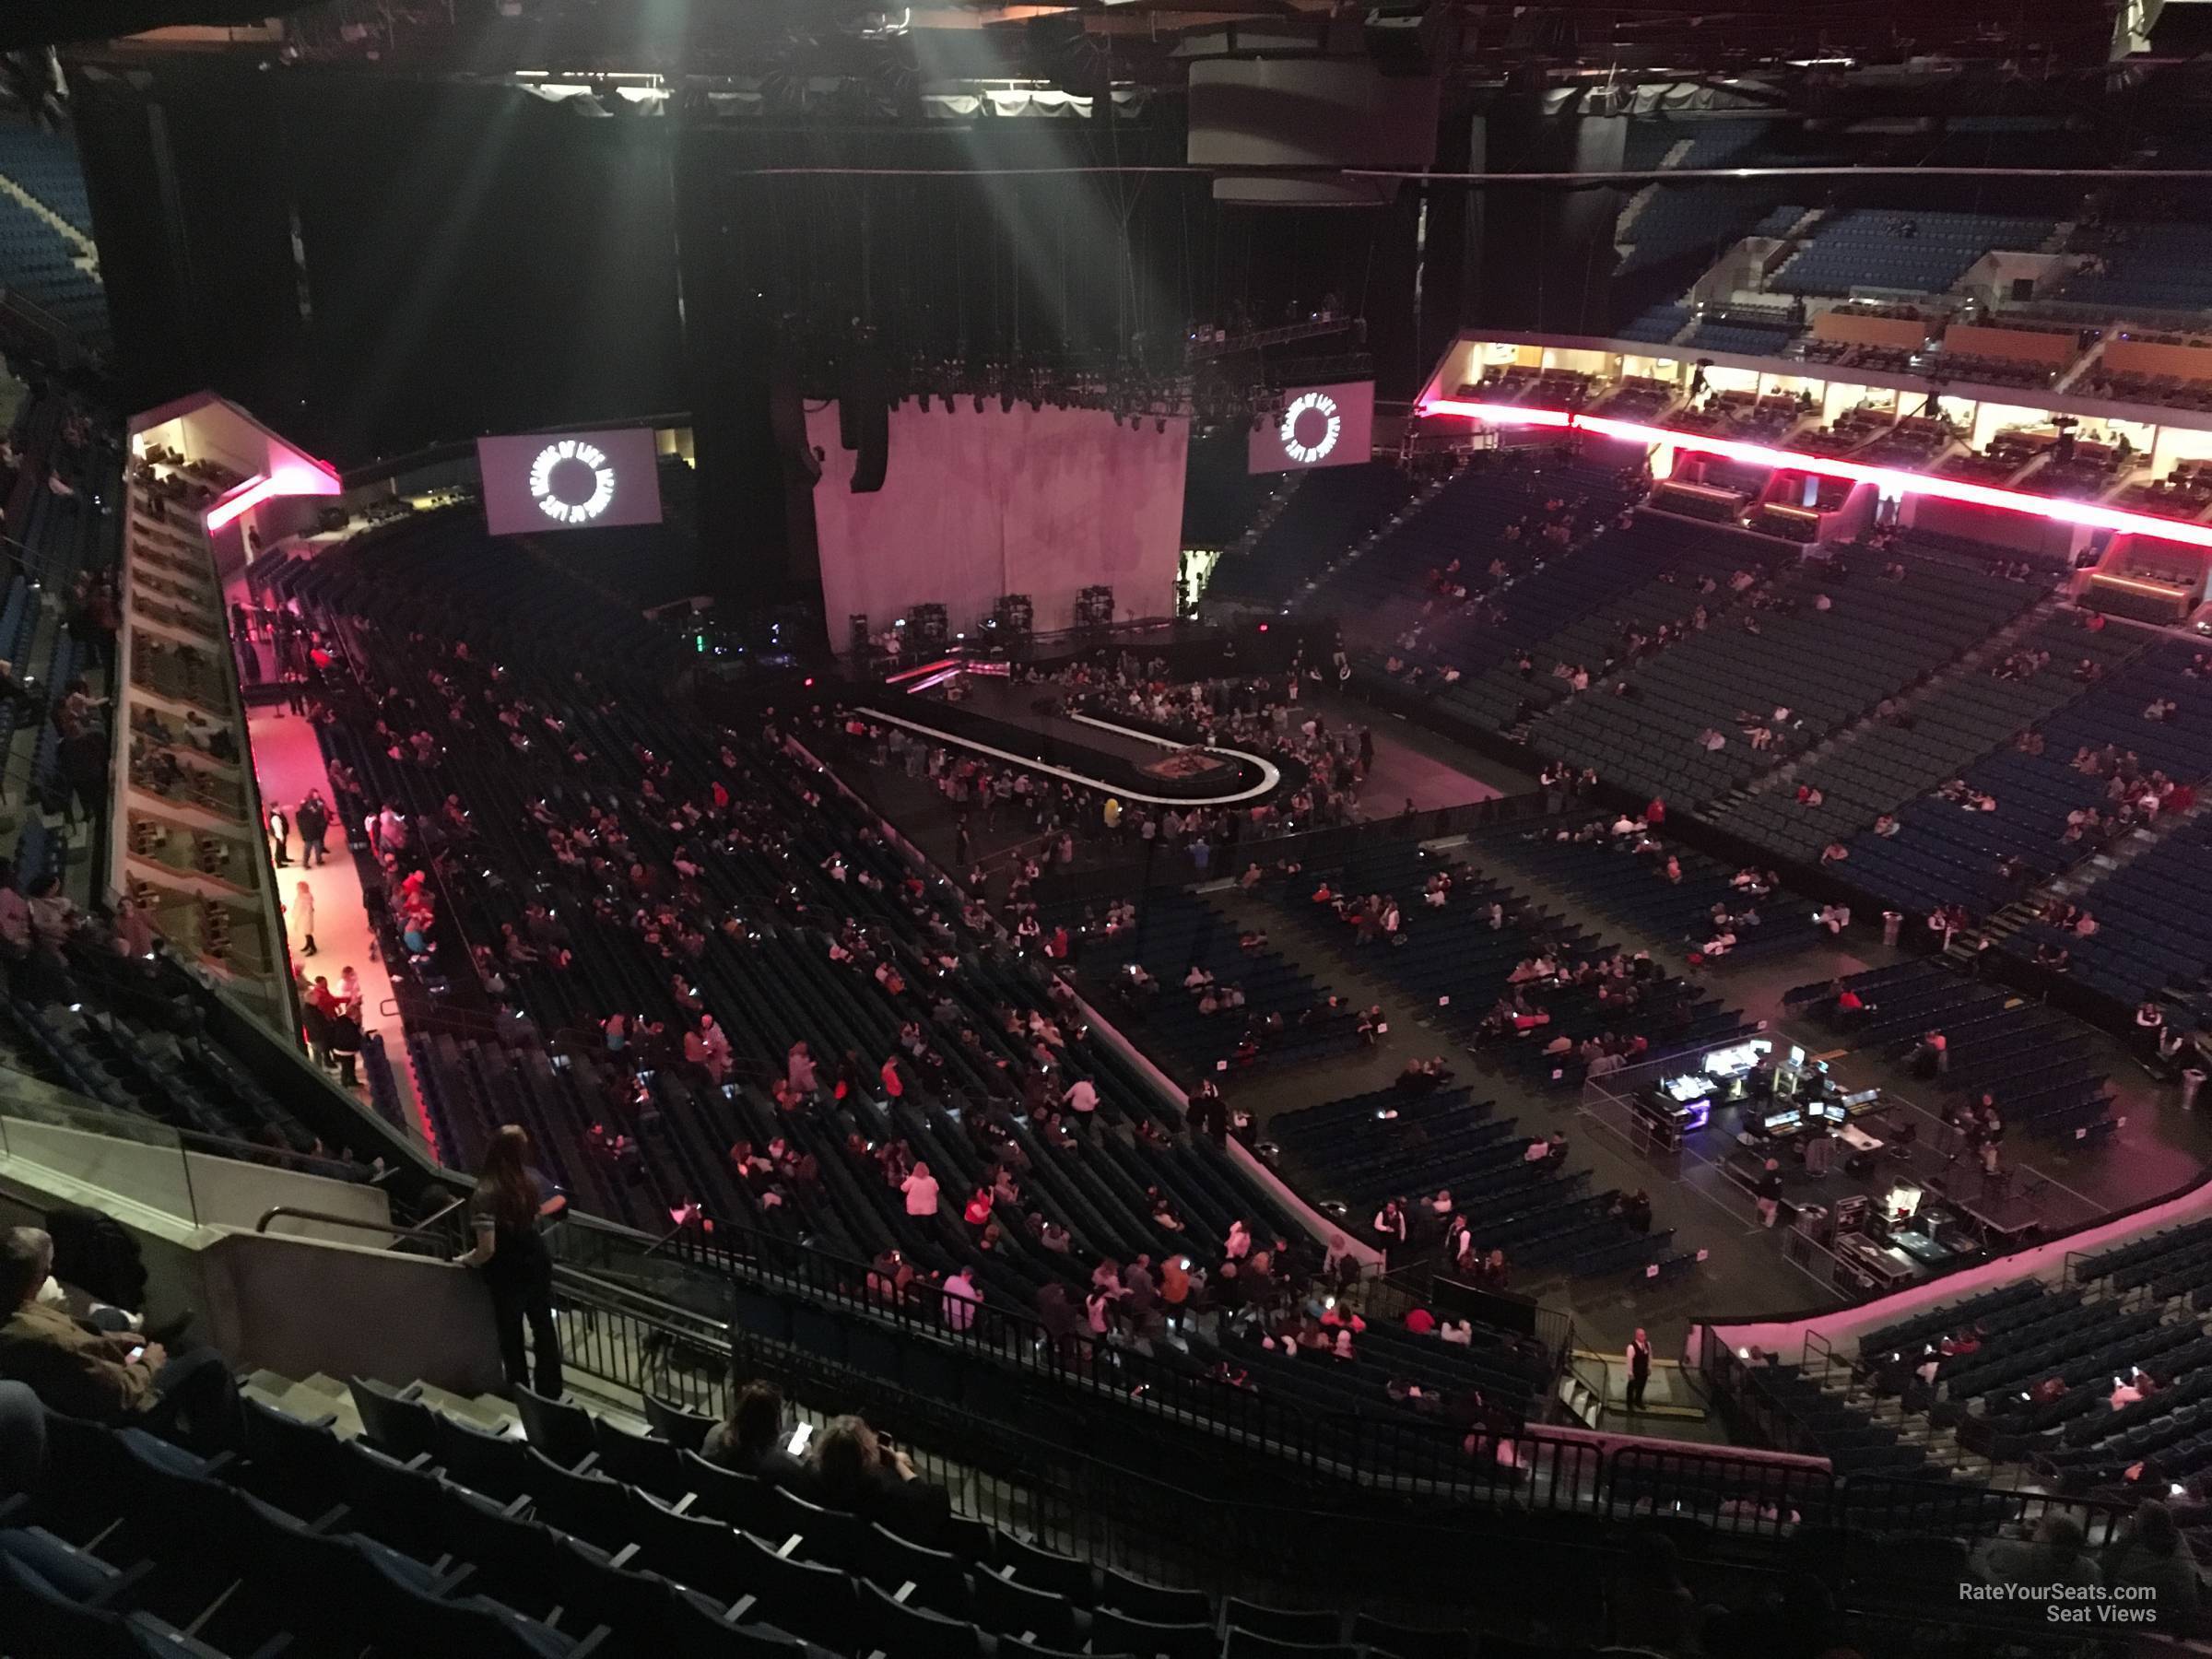 Section 303 at BOK Center for Concerts